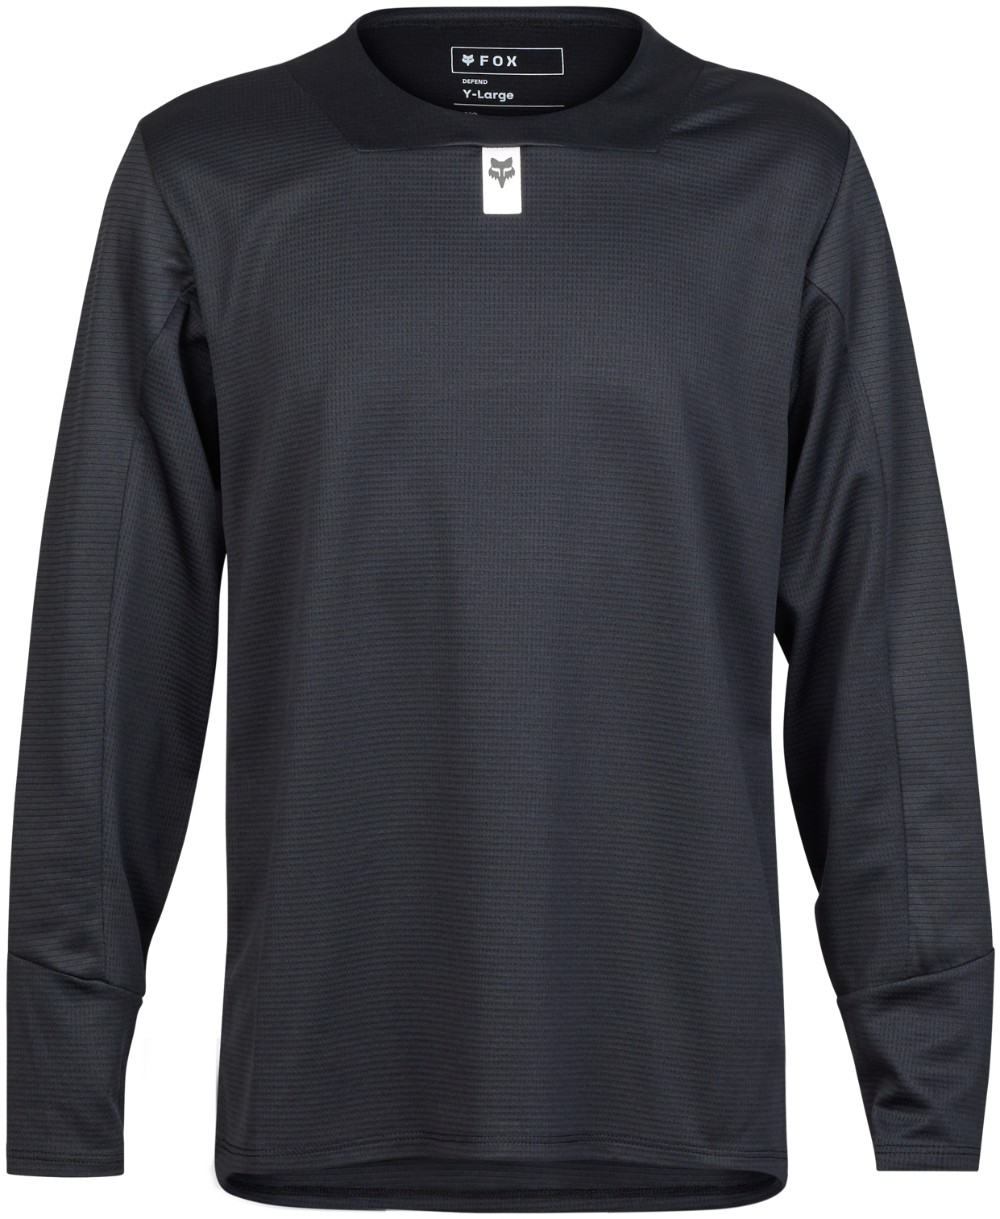 Defend Youth Long Sleeve MTB Jersey image 0